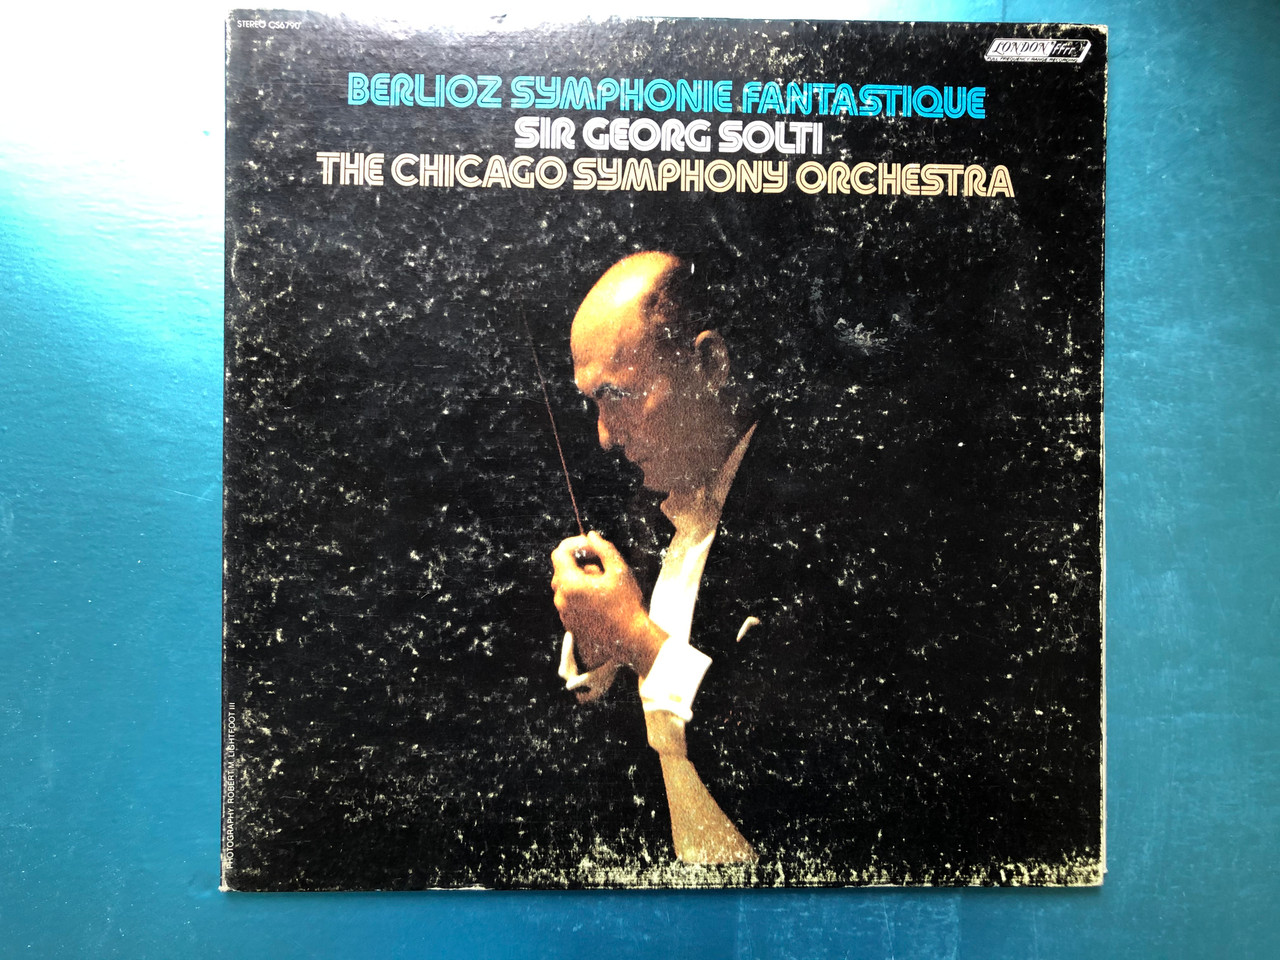 https://cdn10.bigcommerce.com/s-62bdpkt7pb/products/30640/images/181084/Berlioz_Symphonie_Fantastique_-_Sir_Georg_Solti_The_Chicago_Symphony_Orchestra_London_Records_LP_Stereo_CS6790_1__80453.1623350198.1280.1280.JPG?c=2&_ga=2.246380484.1316343633.1623347093-720201591.1623347093